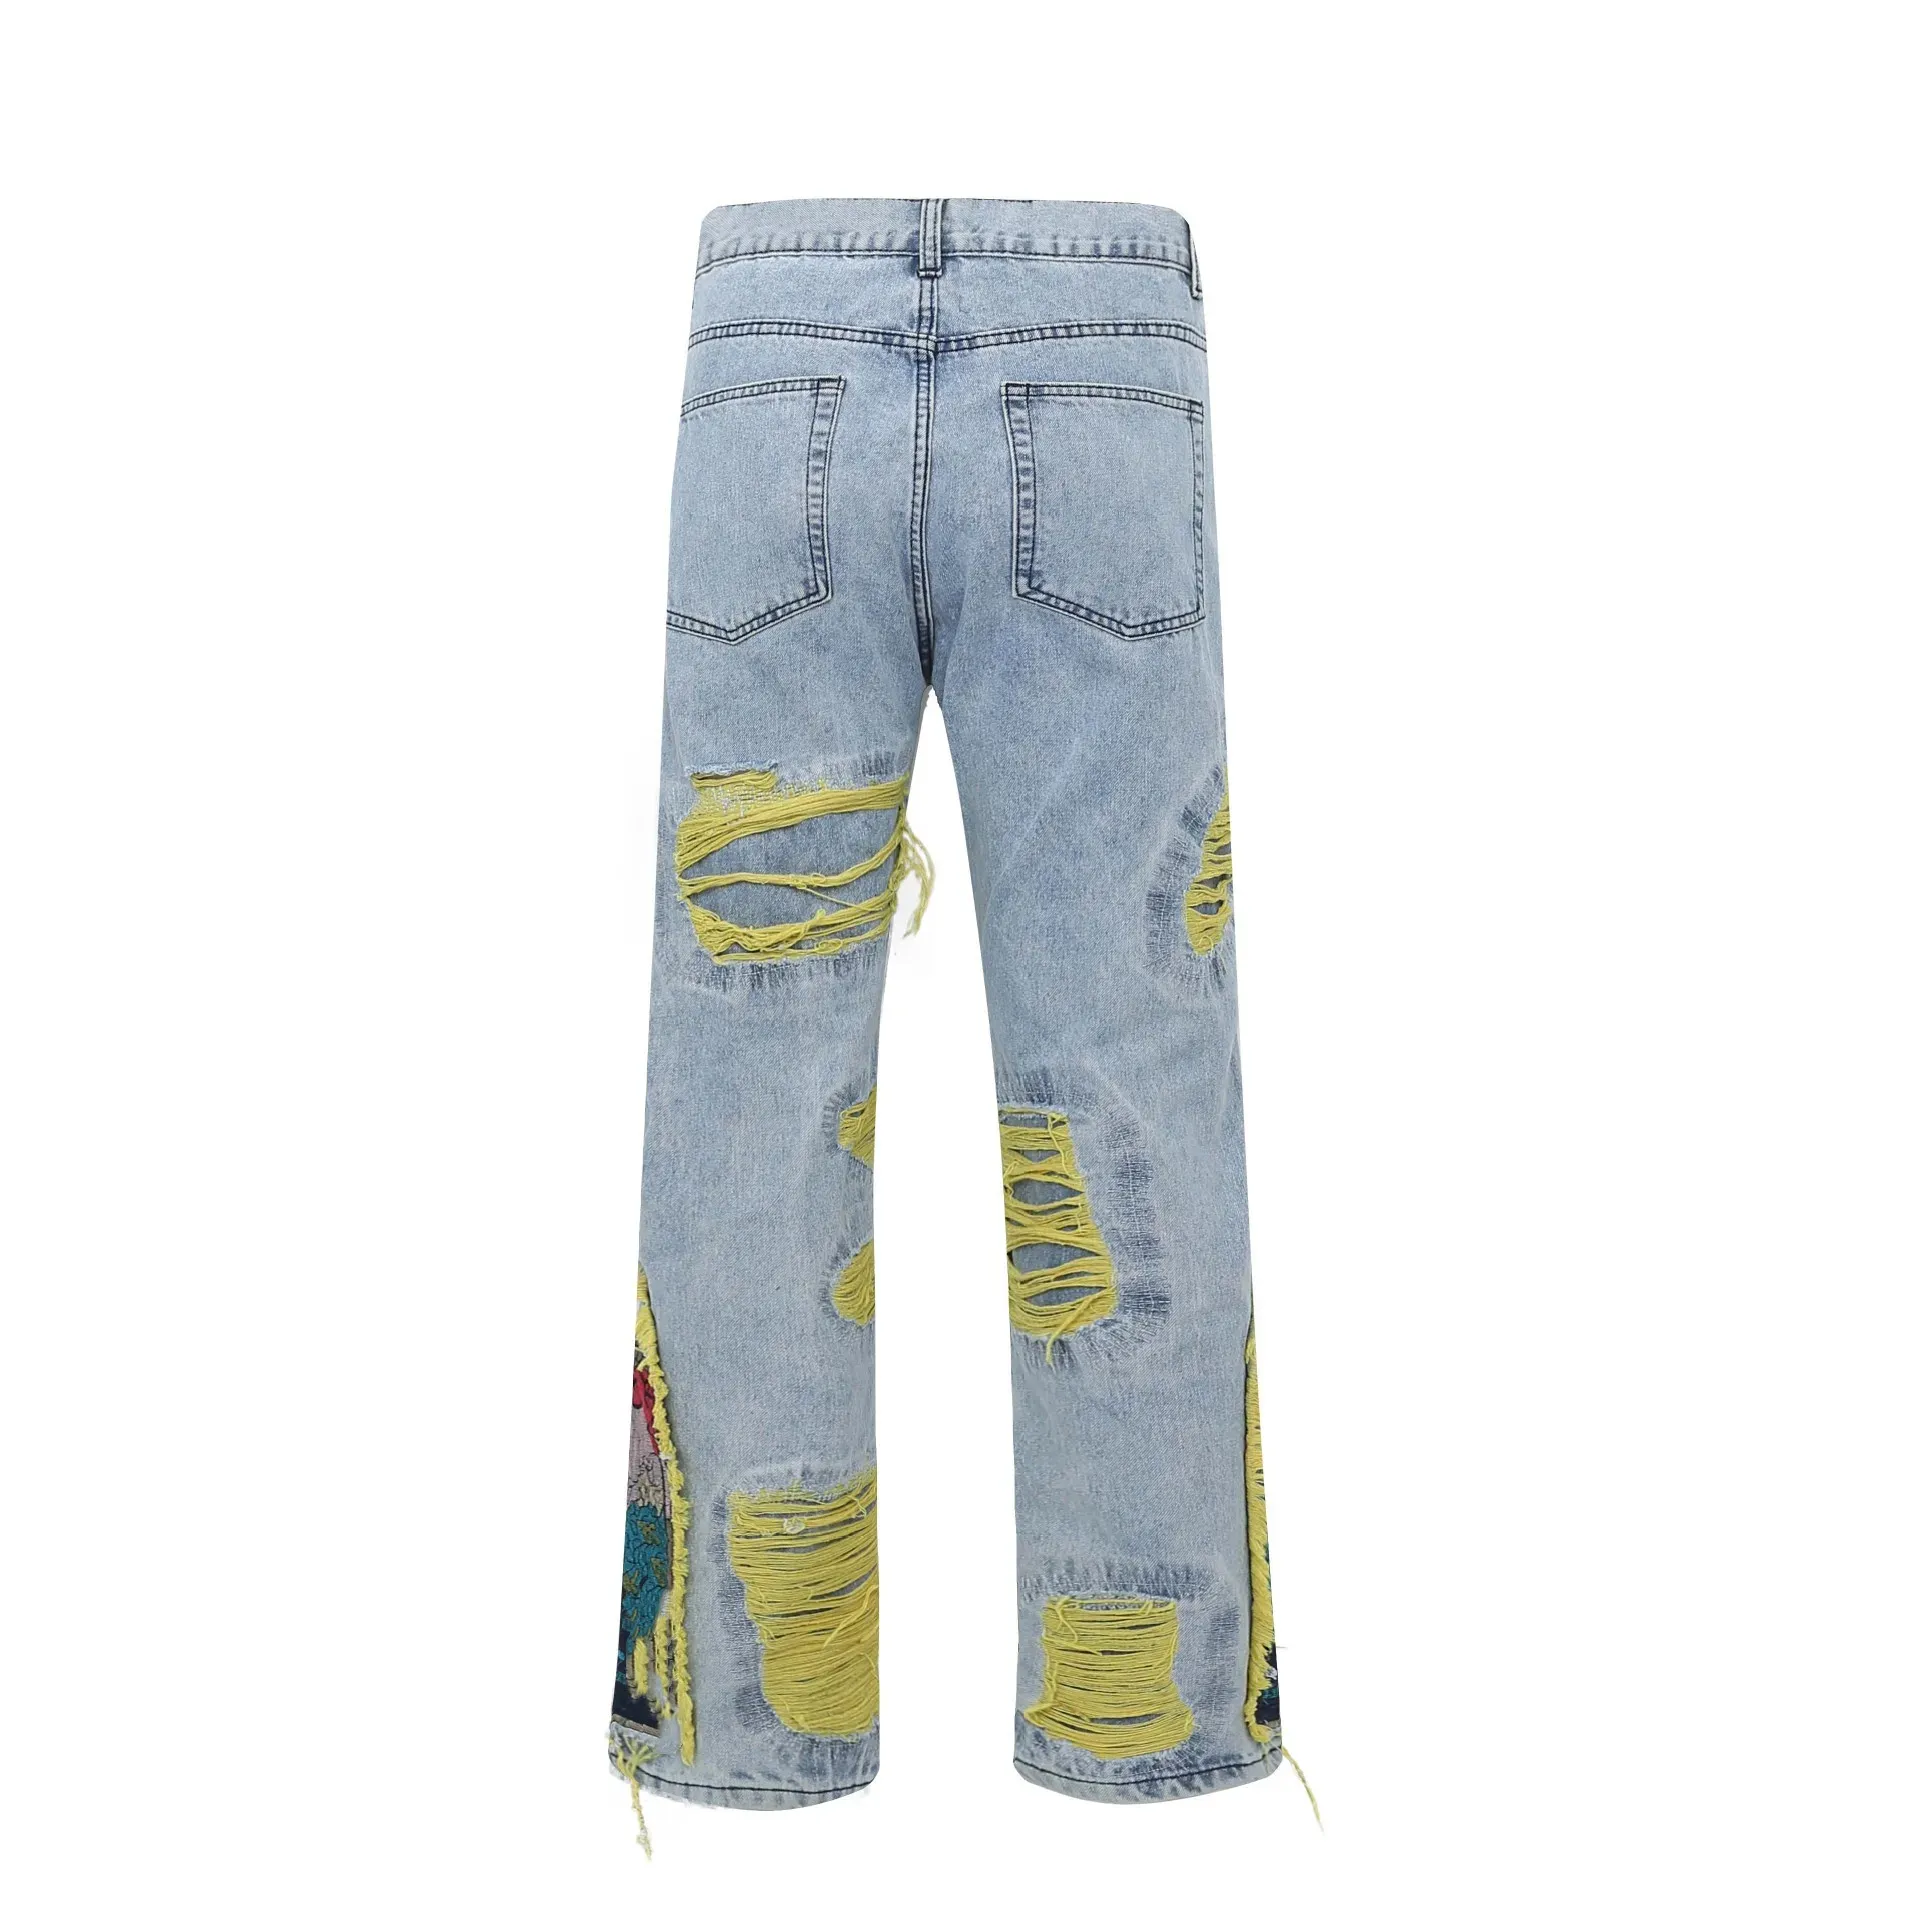 Mens Jeans Oversized Designer Denim Embroidered Ripped Jean High Street Hole Wide-leg Trousers Casual Clothing Pants S-3XL Megogh-8 CXG8181